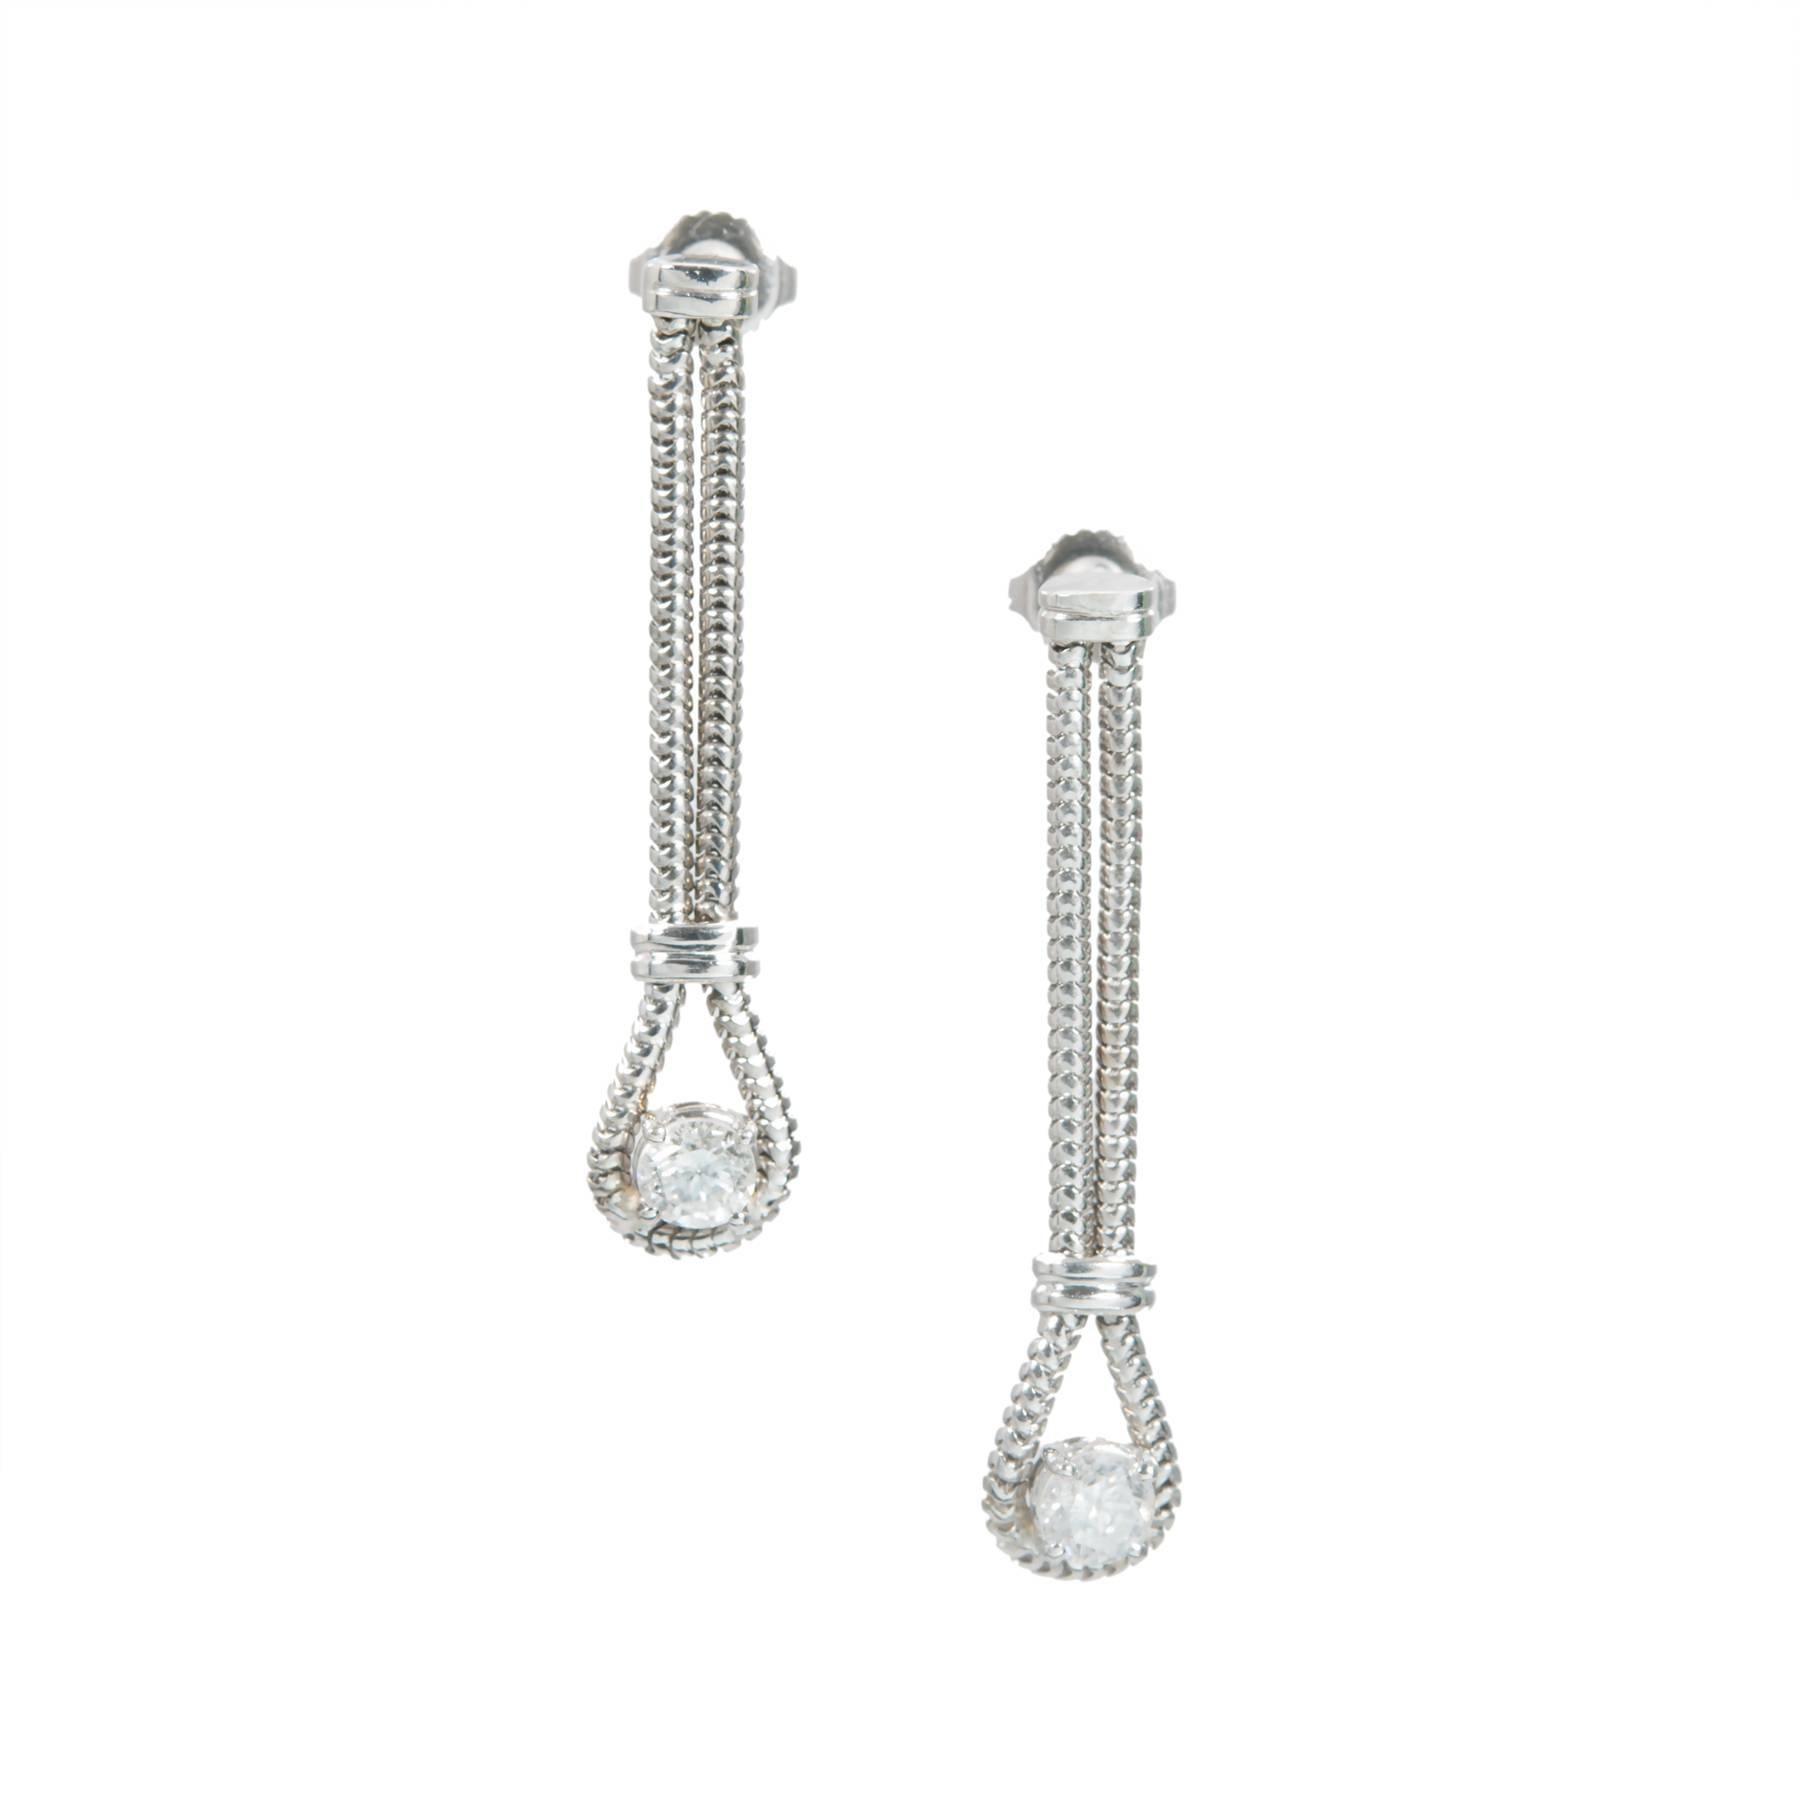 1940's late Art Deco handmade diamond dangle earrings approx. 1 1/2 inch long on 2 rows of handmade round snake chain. Post style tops. Brilliant cut diamond dangles, approx. .37ct each. 

2 round brilliant cut diamonds, approx. total weight .73cts,